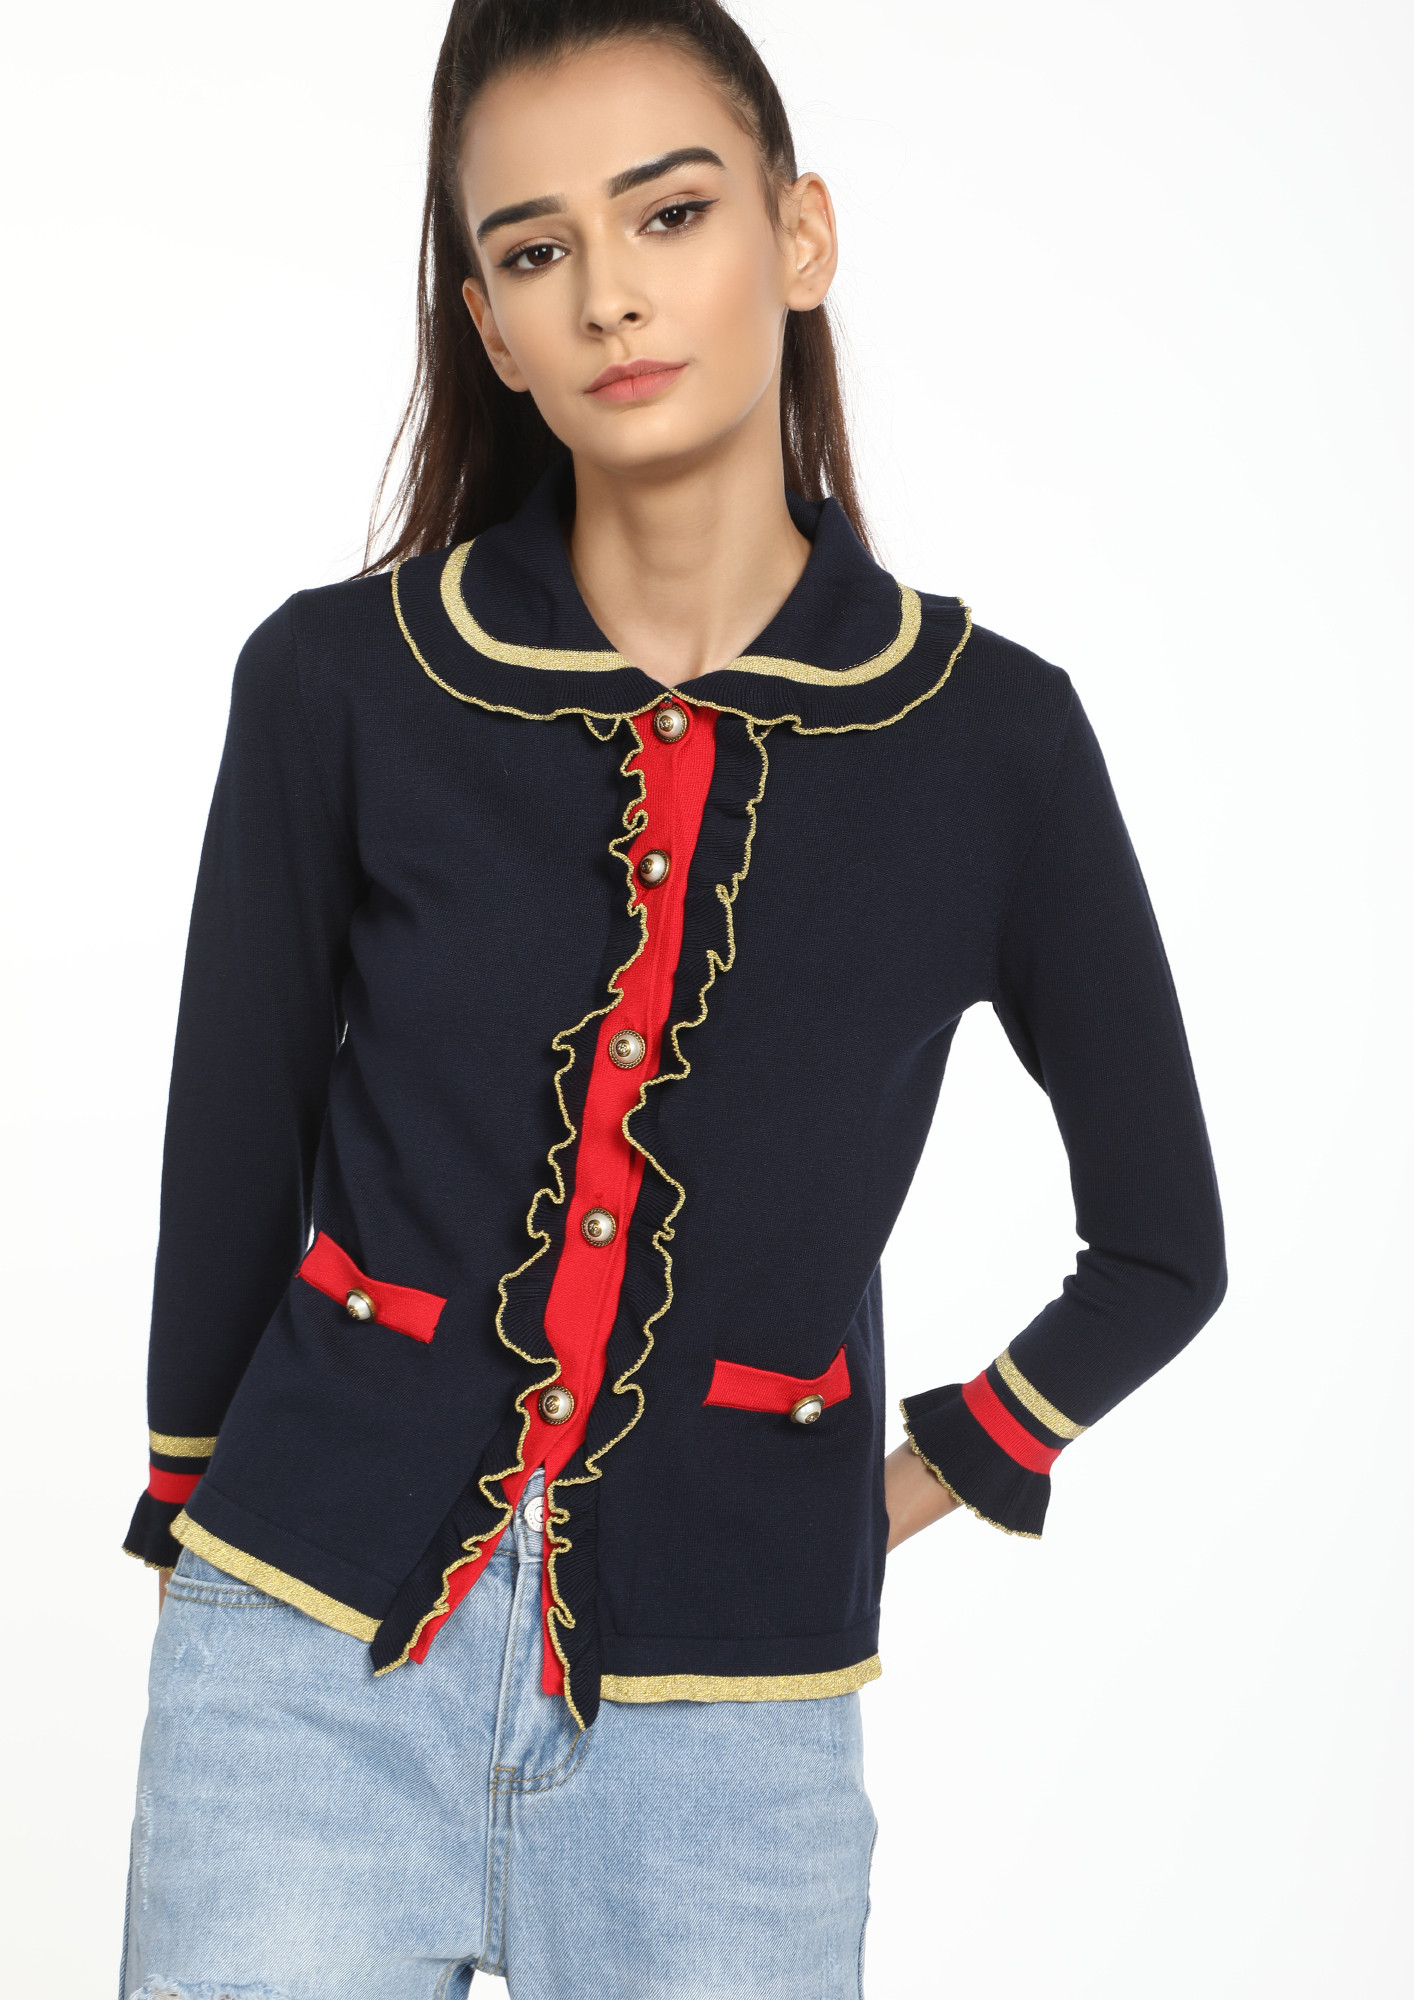 BEHIND THE BUTTON NAVY TOP